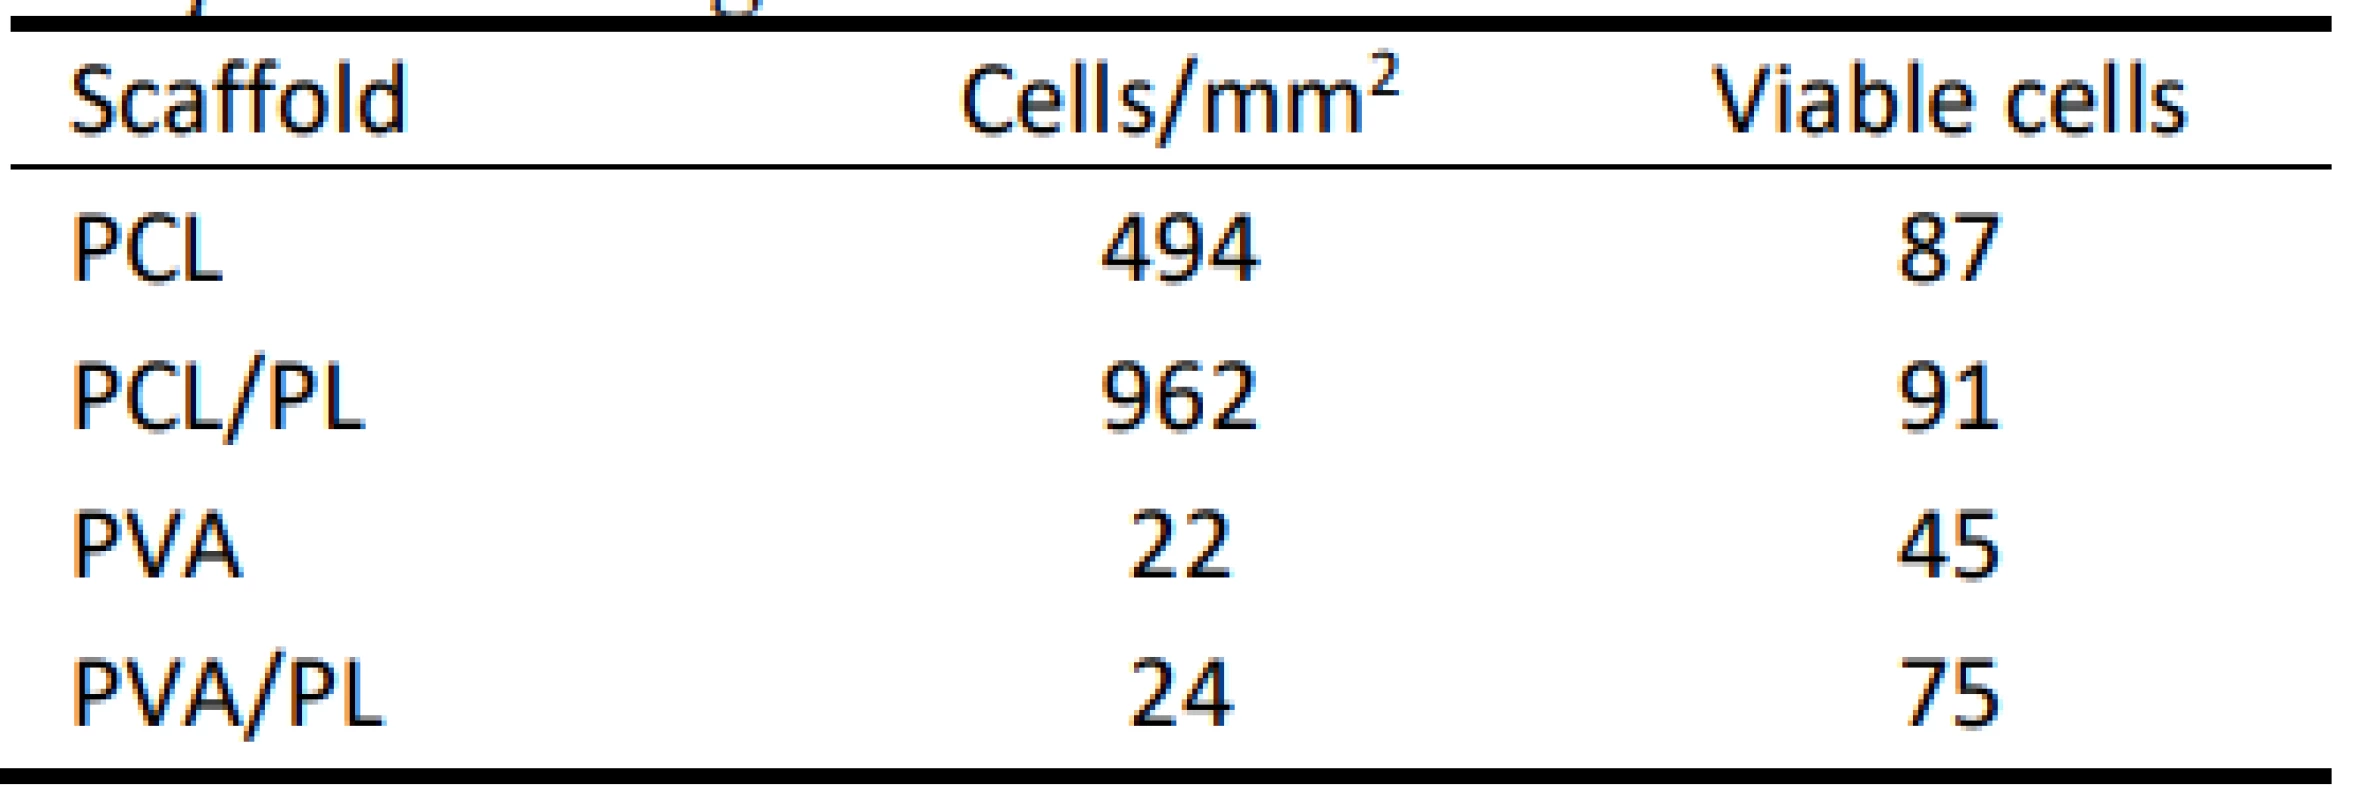 Summary of viable cells detected on the nanofibrous scaffolds. Data were collected from at least 3
independent images.